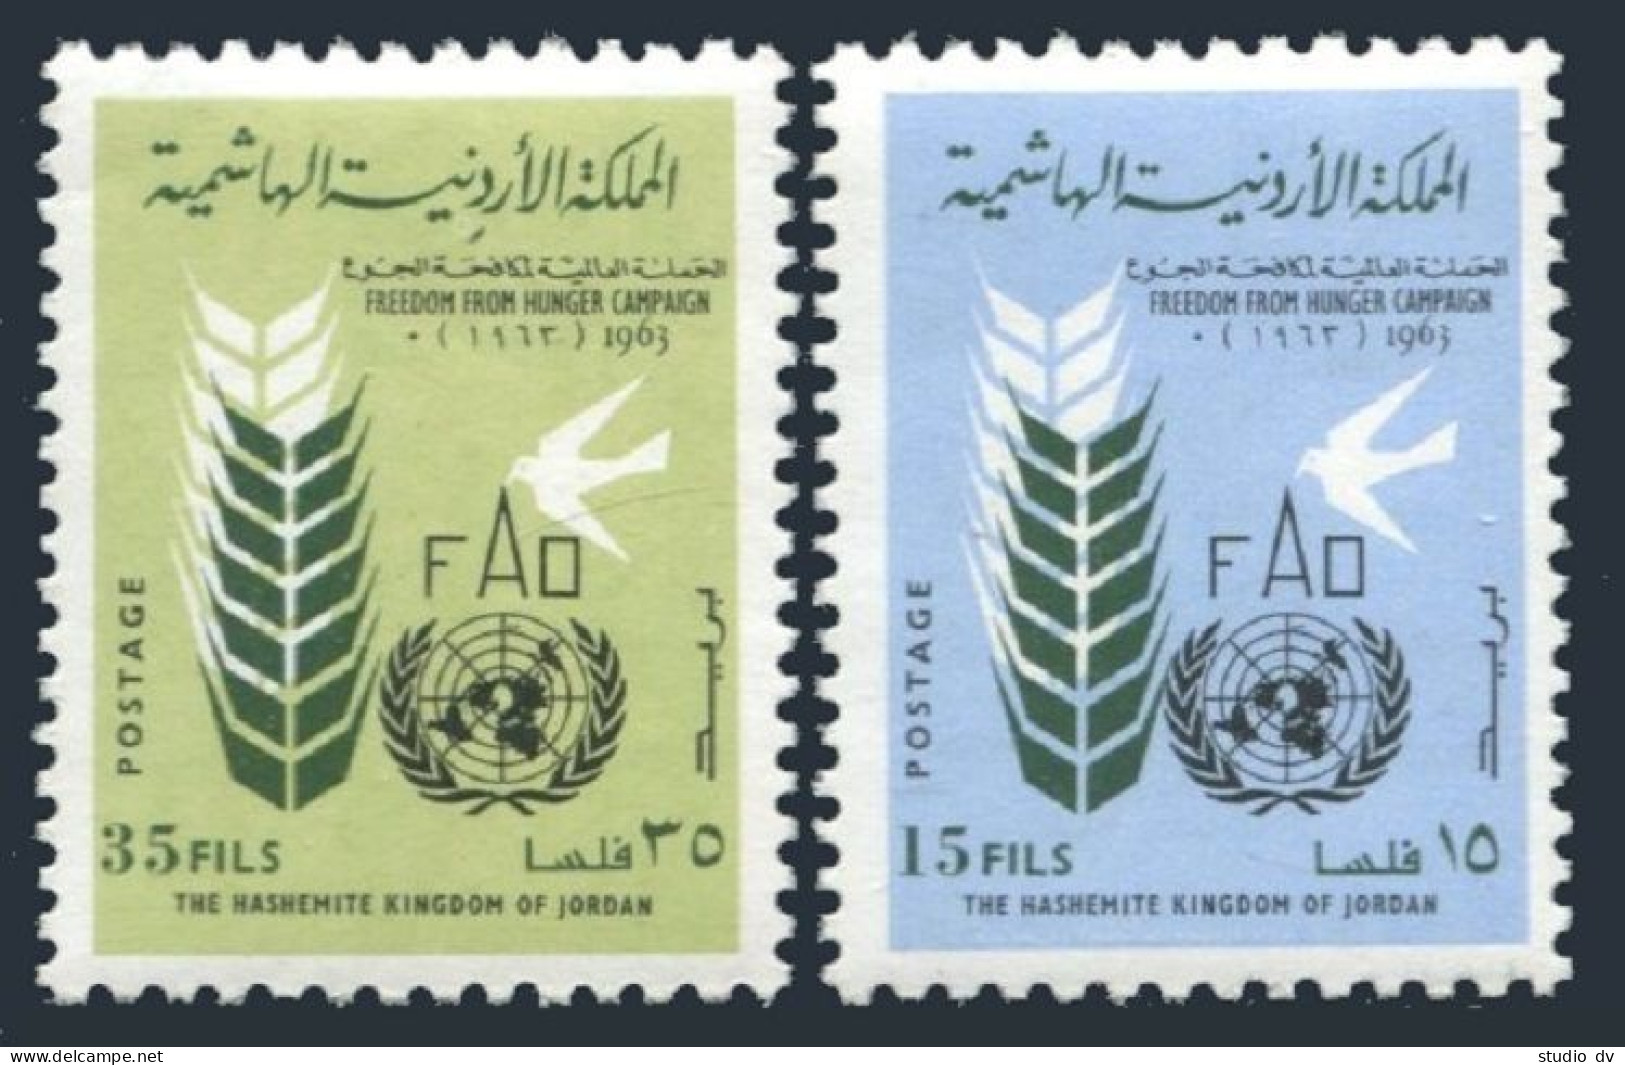 Jordan 398-399,399a & Imperf, MNH. FAO Freedom From Hunger Campaign 1963. - Giordania